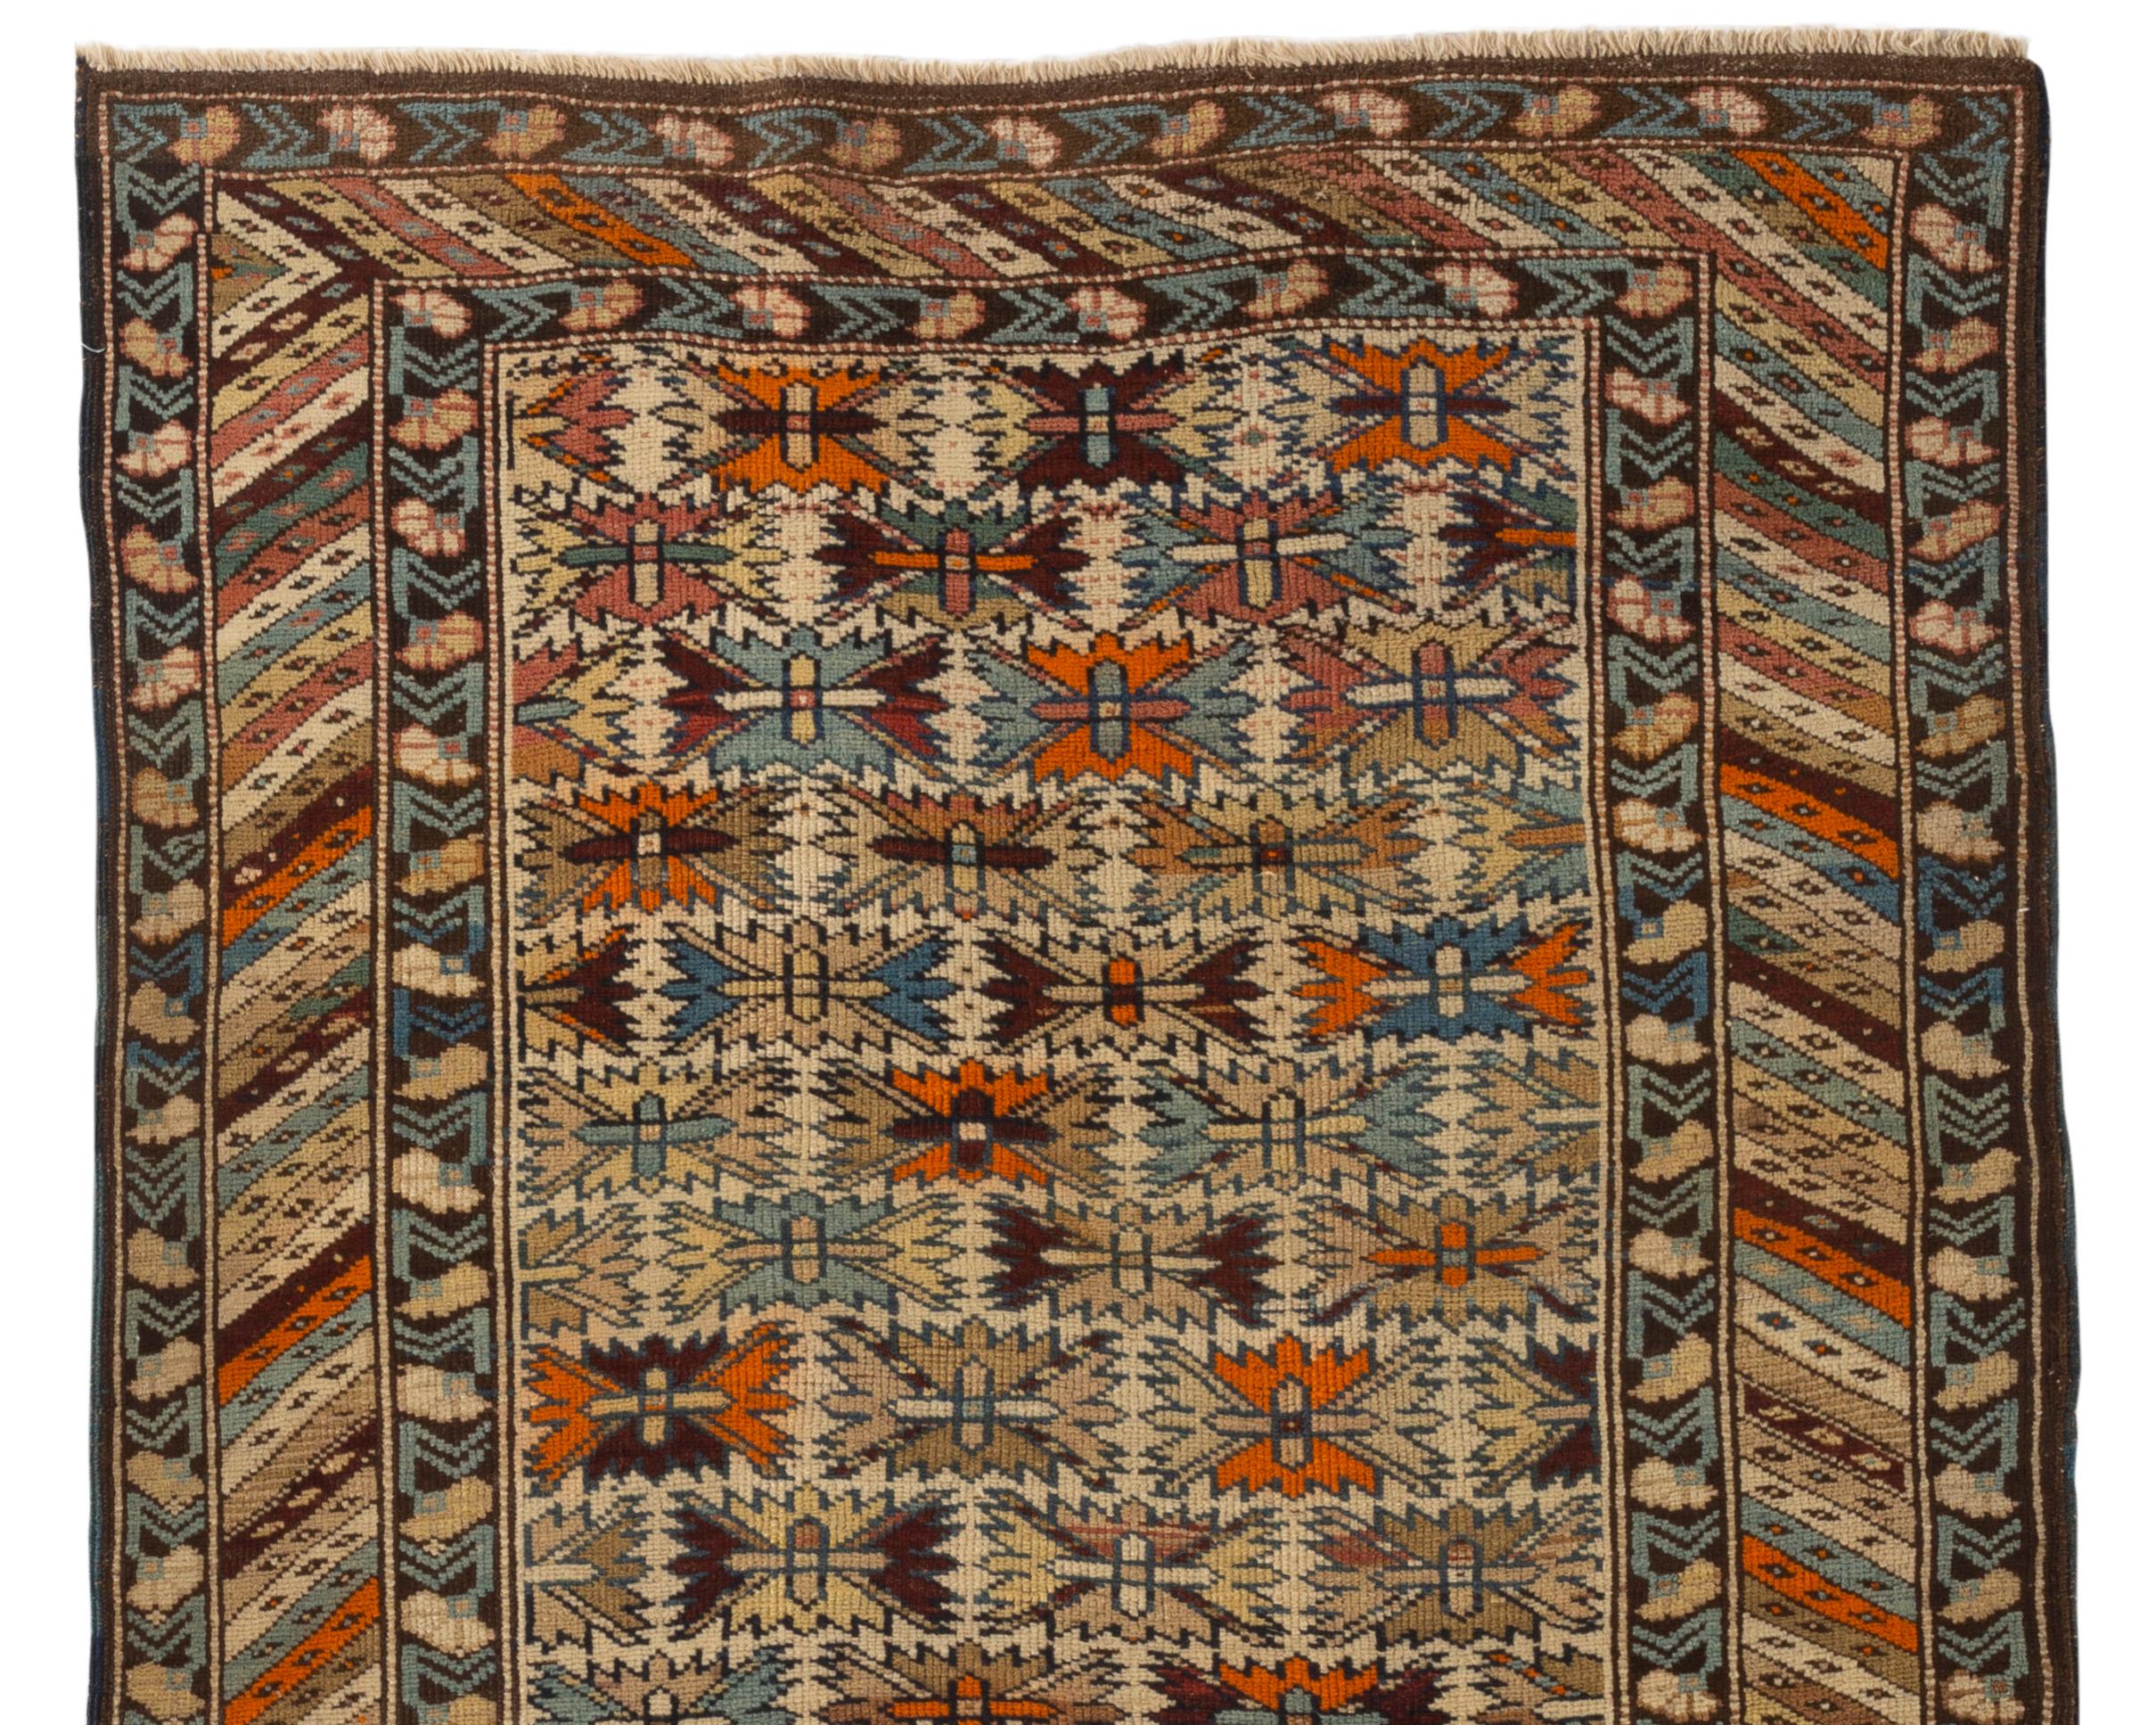 Antique Shirvan Caucasian rug, circa 1900. With an all-over design unusual in Shirvan rugs the floral designs in soft colors which are repeated in the multiple borders. These types of antique Caucasian rugs were woven in the eastern part of the